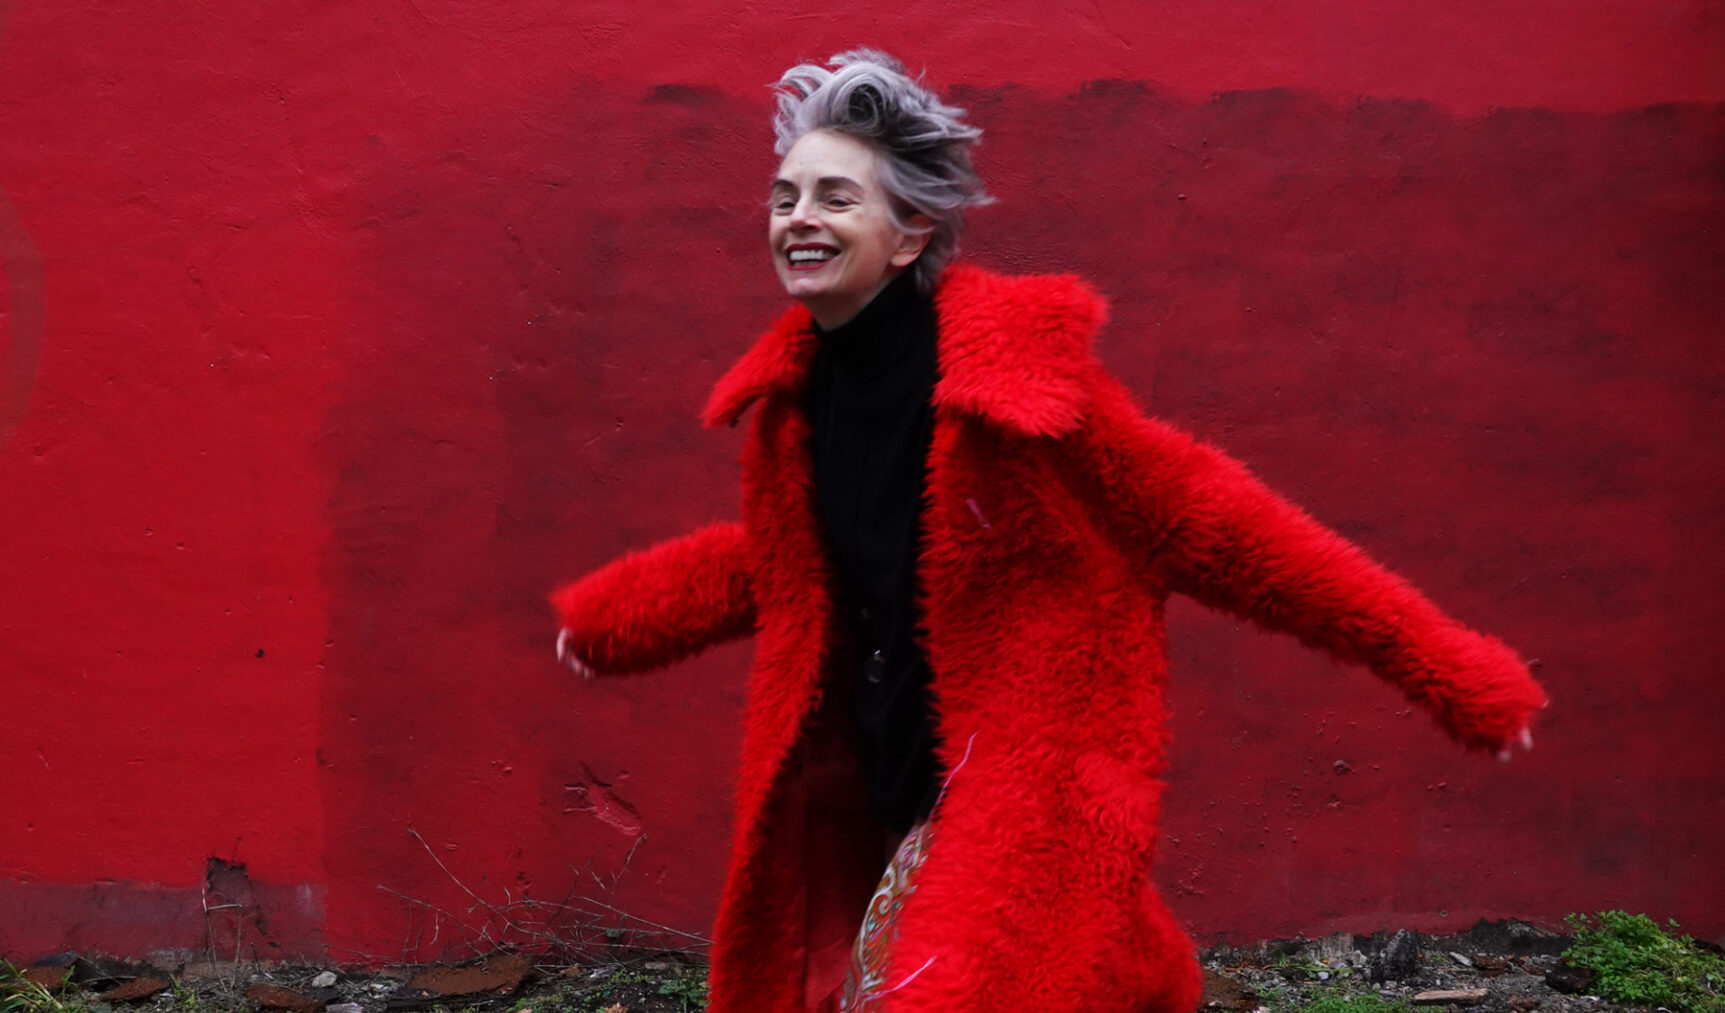 Woman with silver hair and red coat smiling in front of red wall